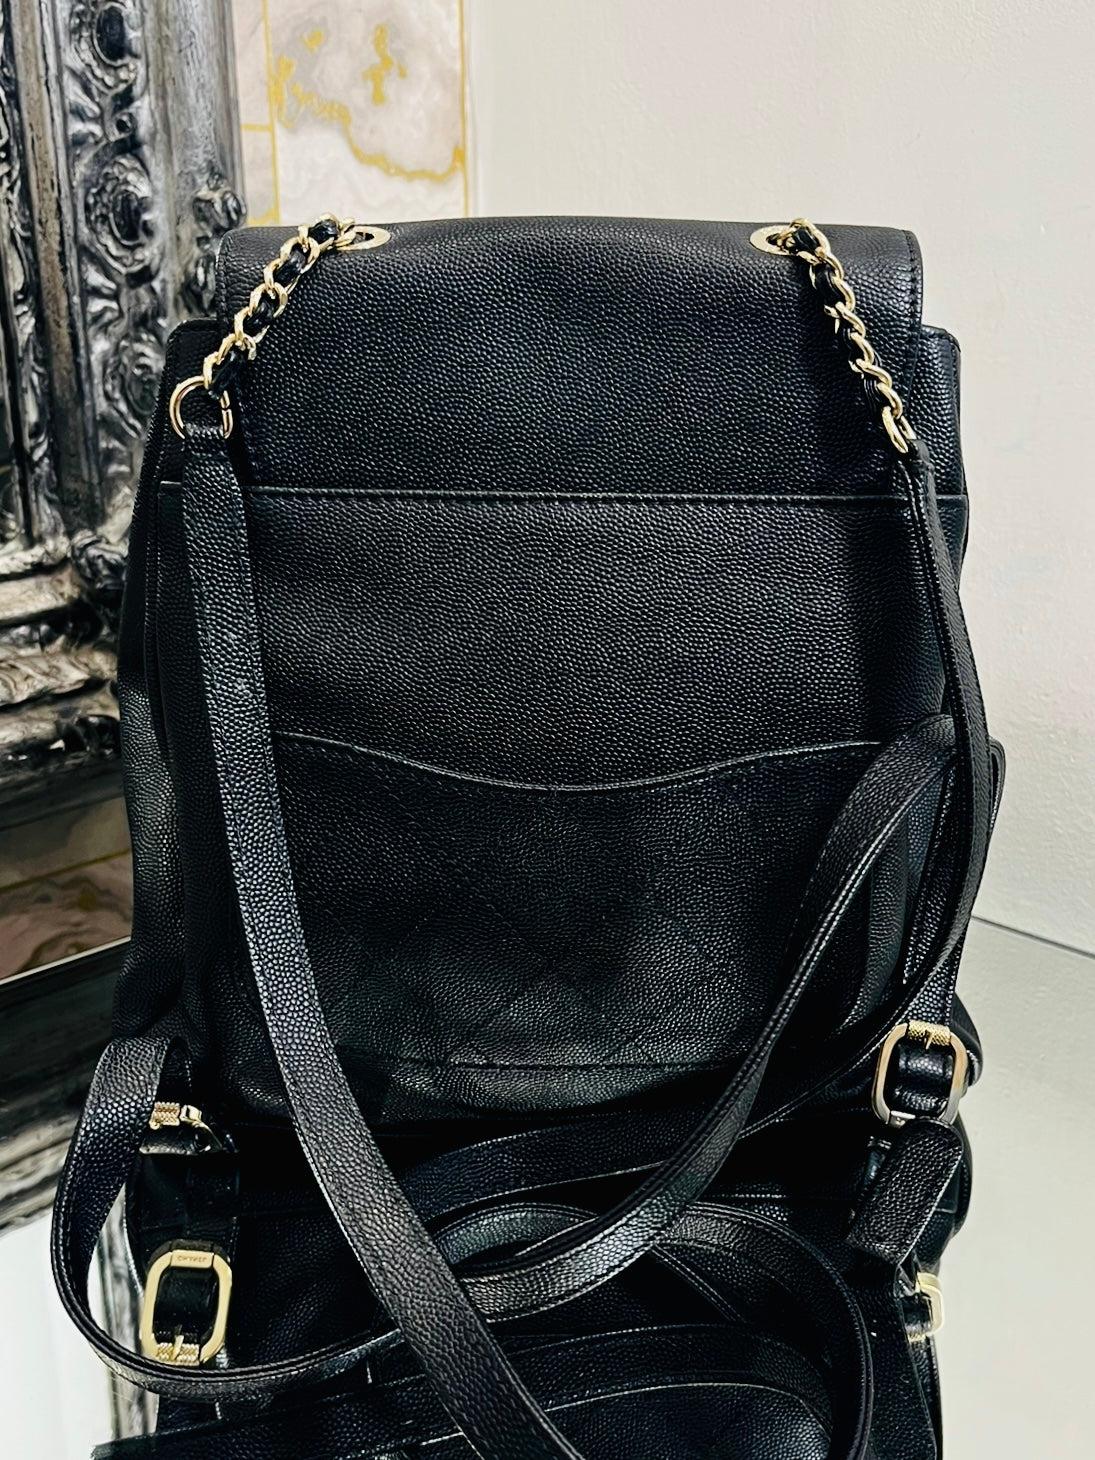 Women's Chanel Affinity Caviar Leather Backpack For Sale